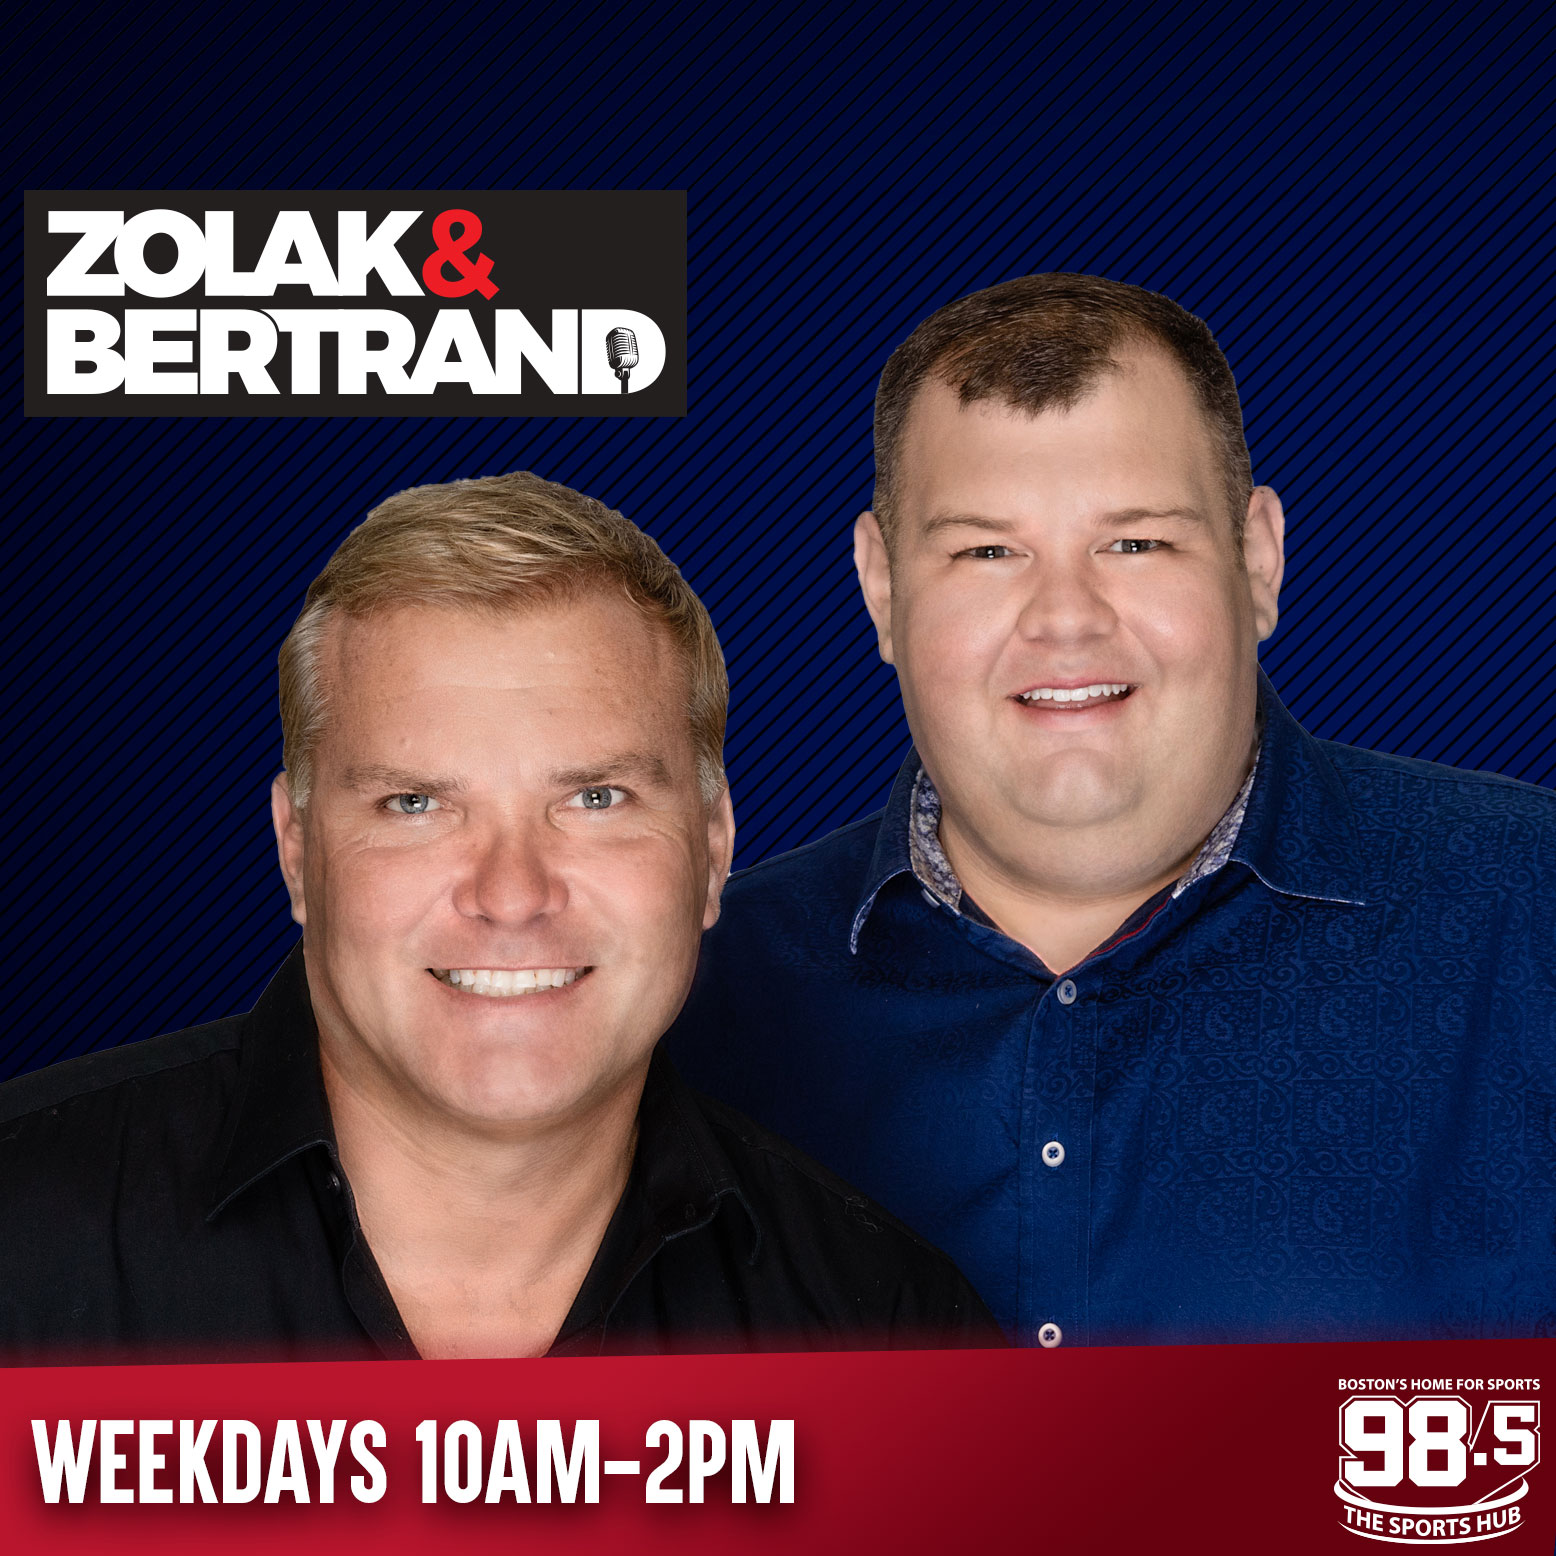 Patriots Want Odell Beckham Jr. // OBJ Would Be A Win For Bill Belichick // Mac Jones Speaks Out On “Dirty Play” - 11/9 (Hour 1)